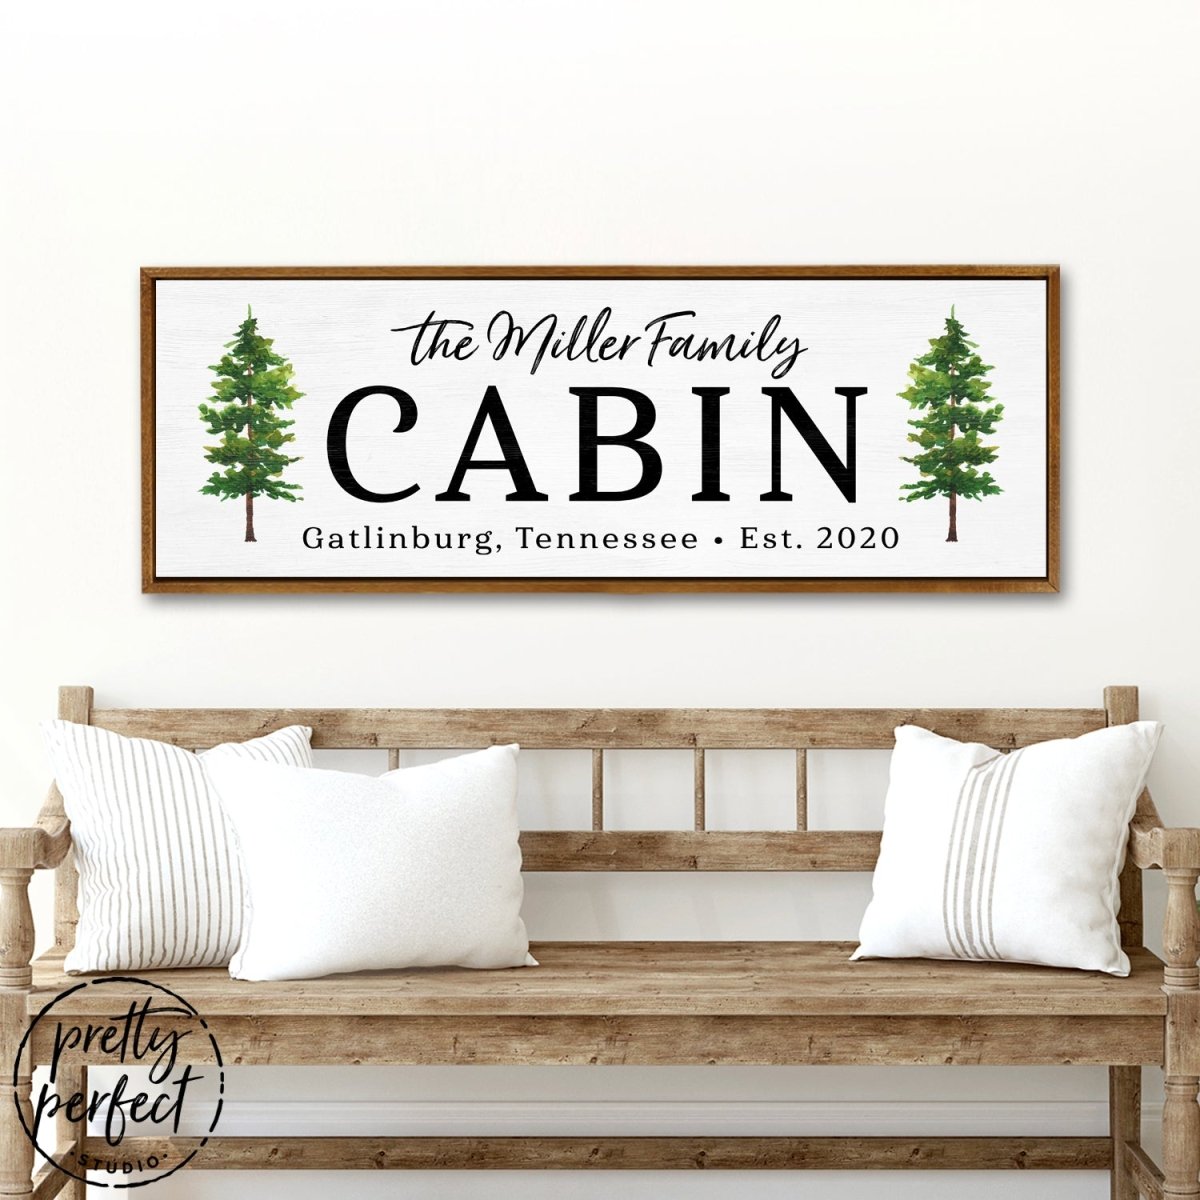 Personalized Family Cabin Sign Hanging in Entryway of Home - Pretty Perfect Studio